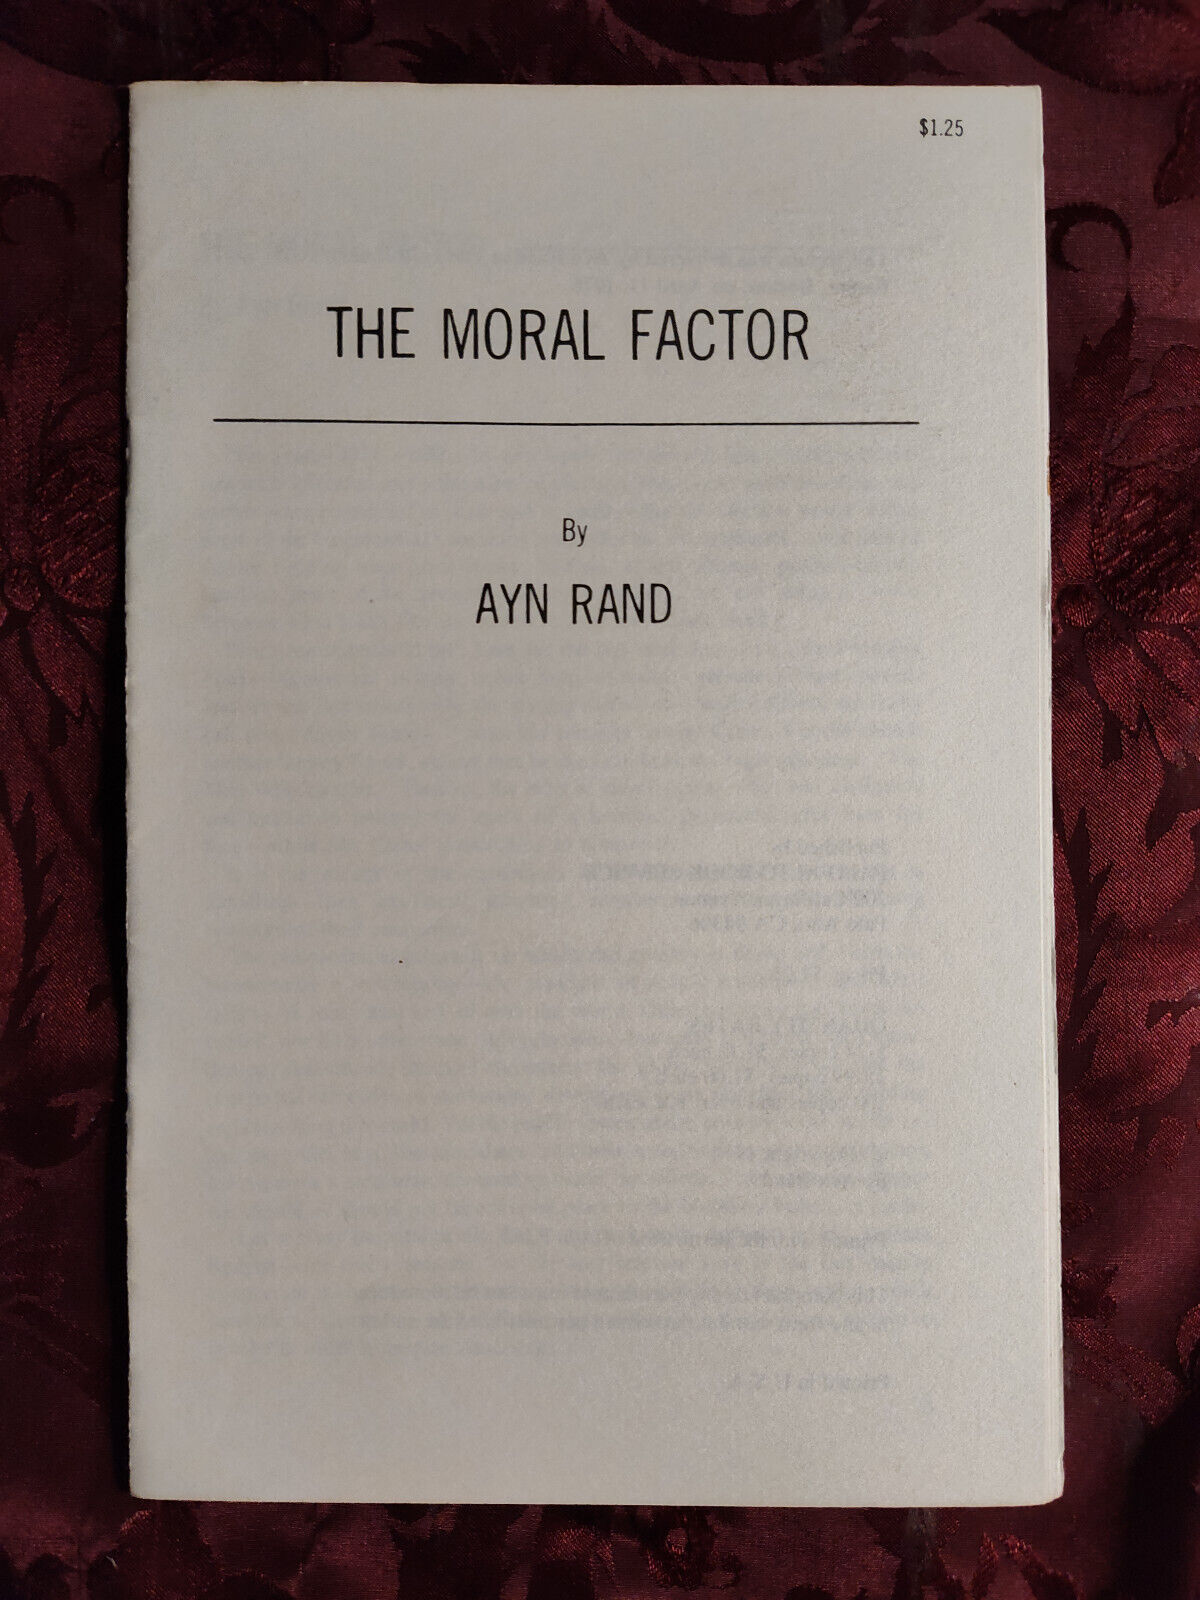 RARE Ayn Rand Objectivist Pamphlet The Moral Factor